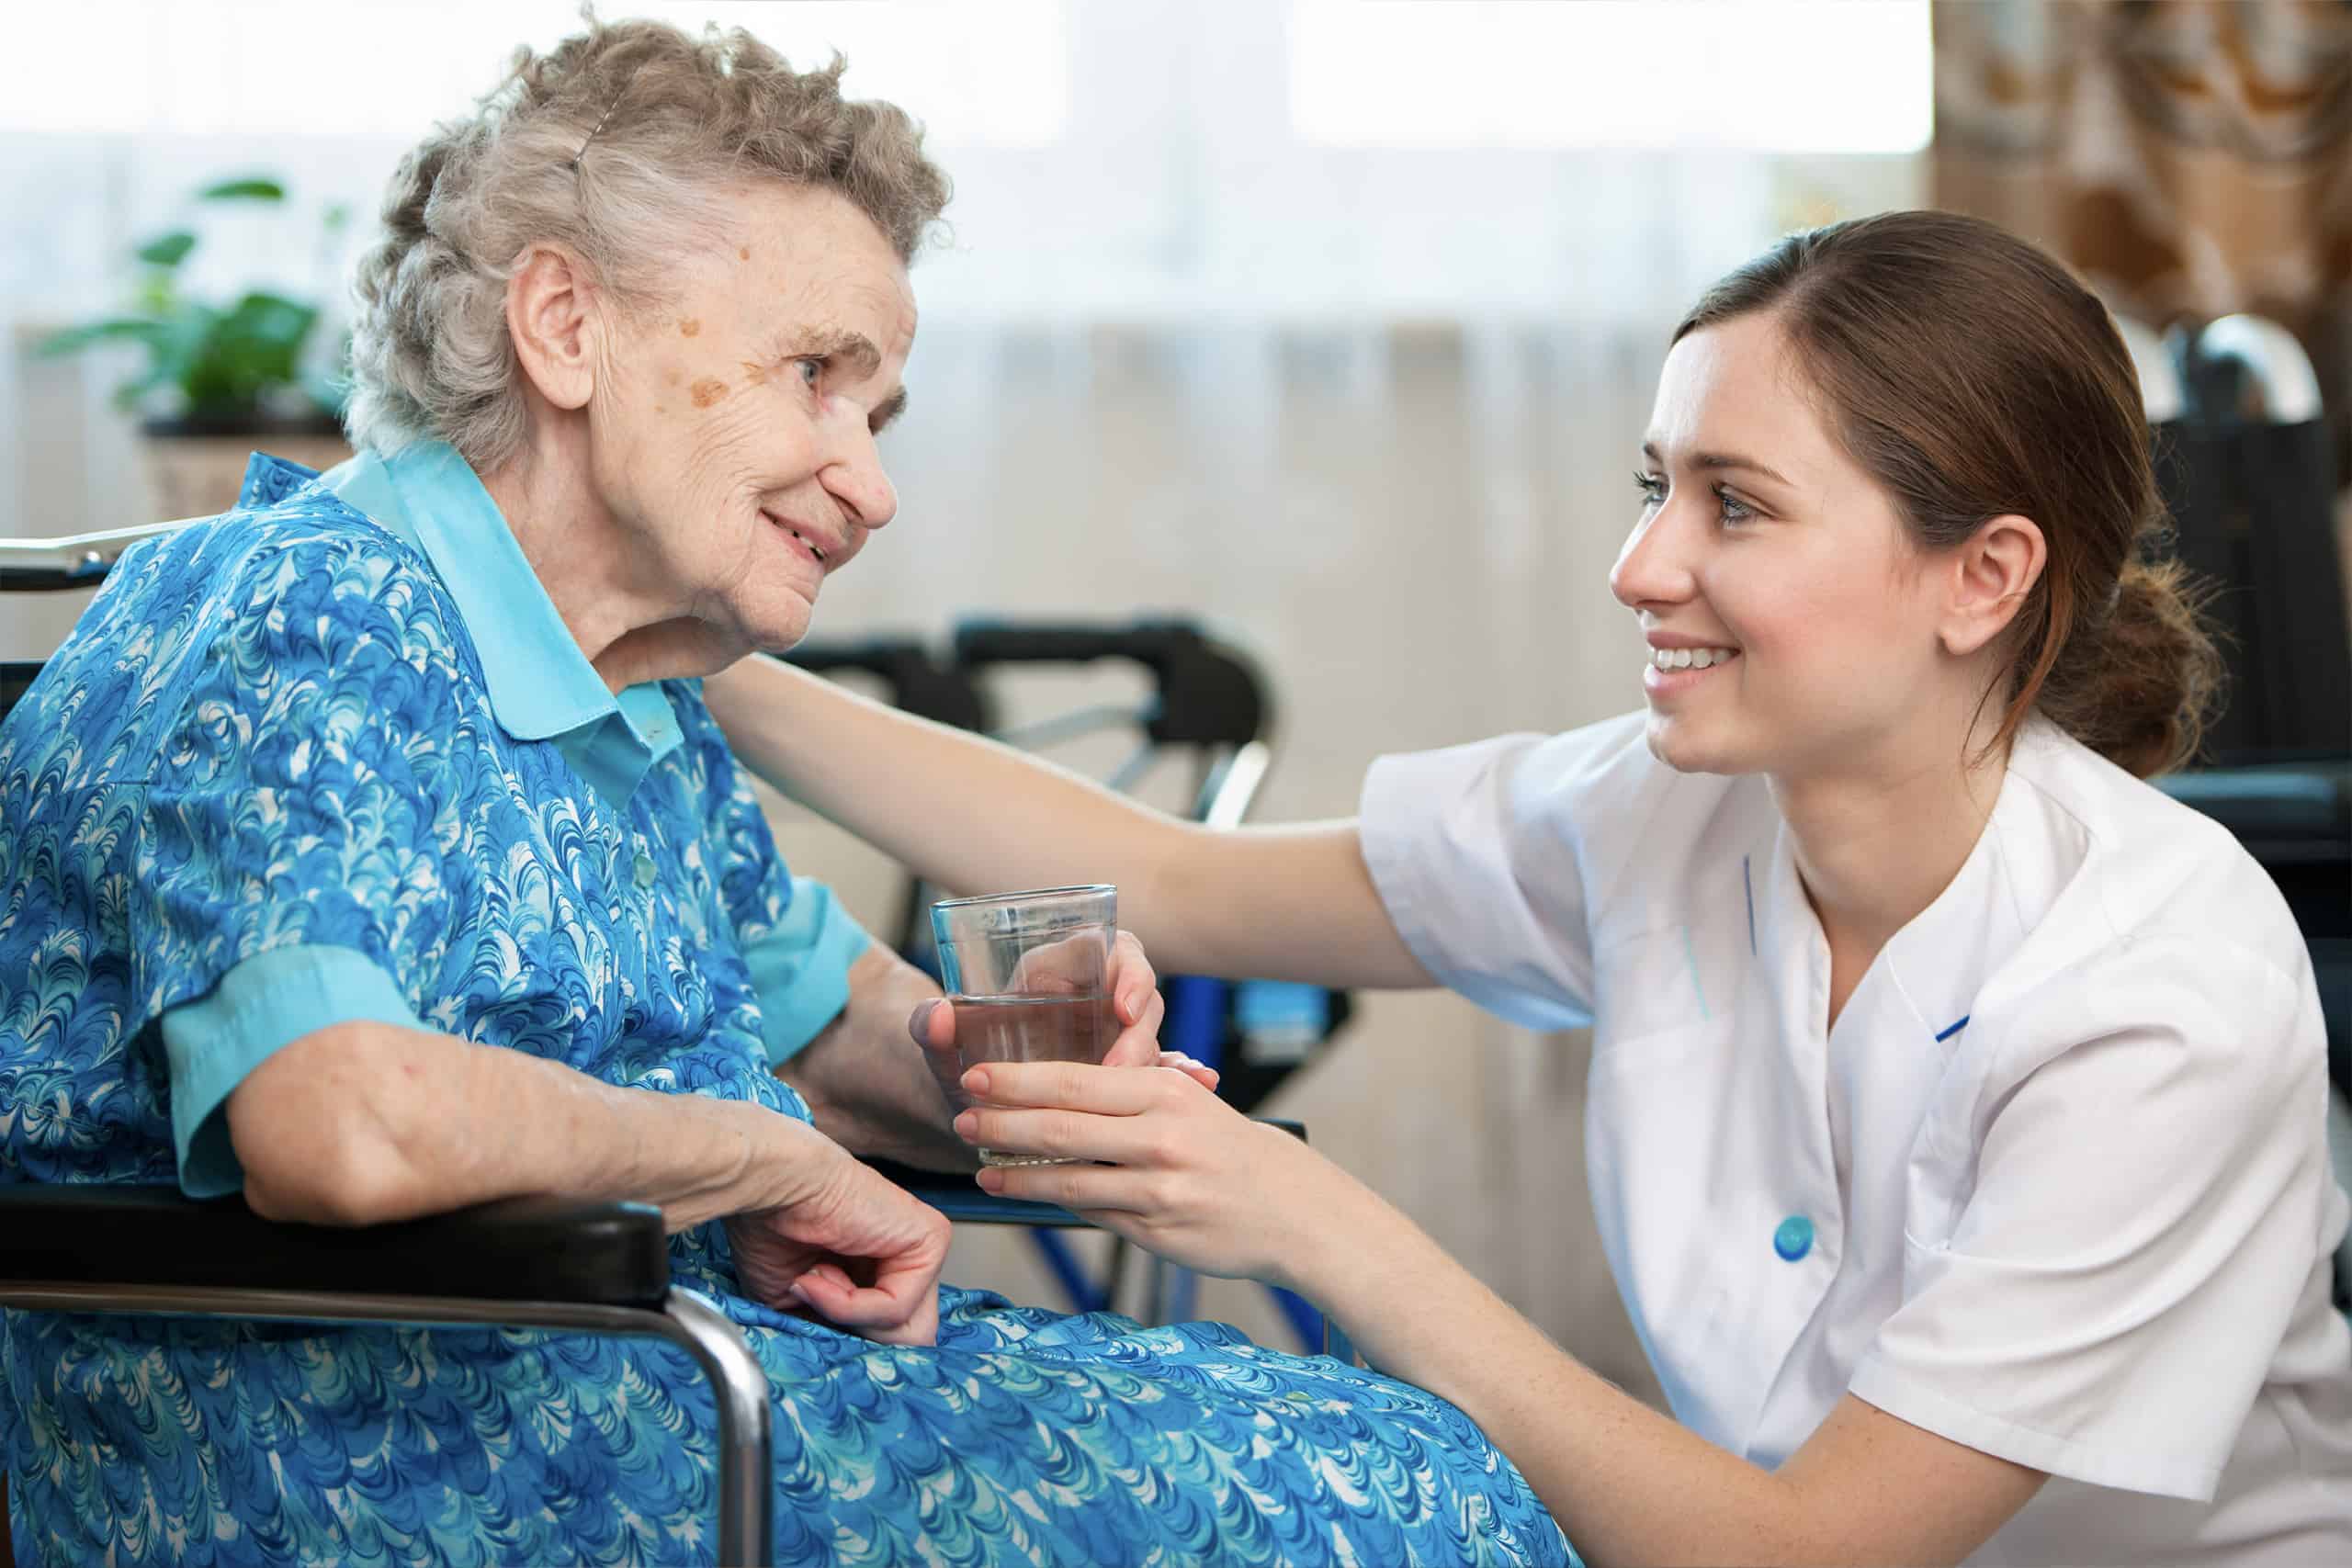 Aged Care Sector in High Demand for Staff